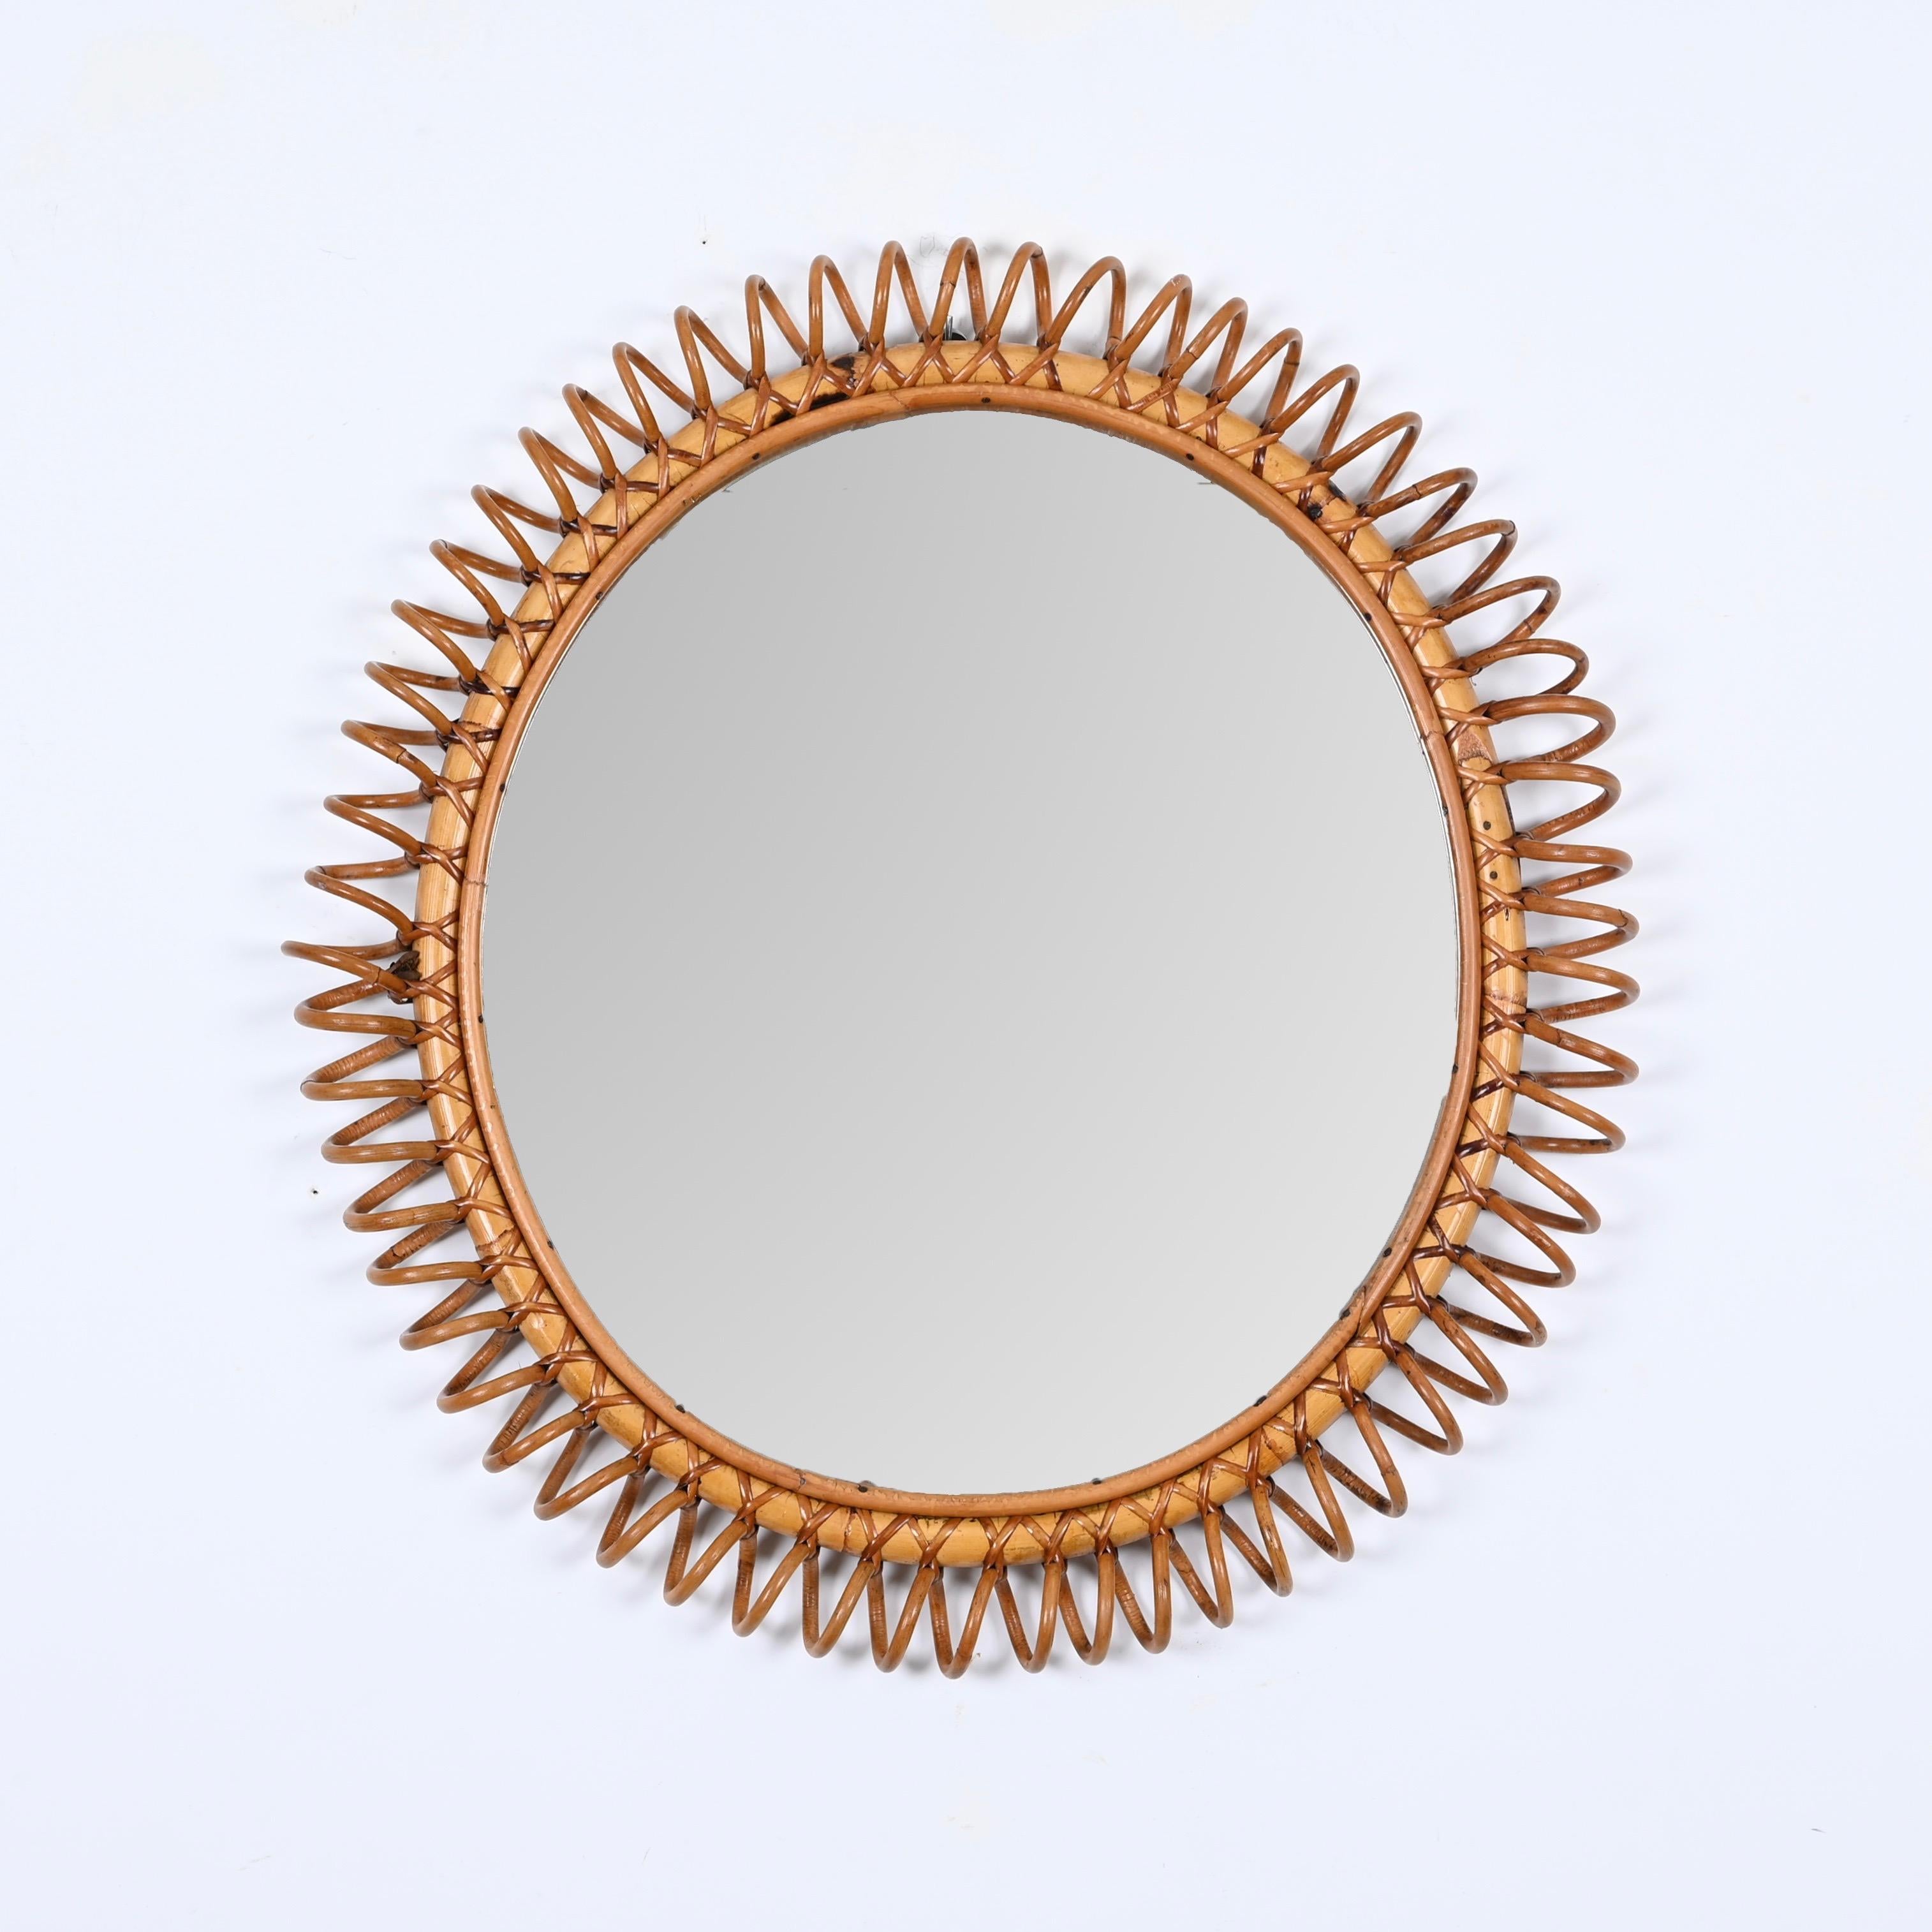 Mid-Century Spring Round Shape Mirror in Rattan, Wicker and Bamboo, Italy 1960s For Sale 2